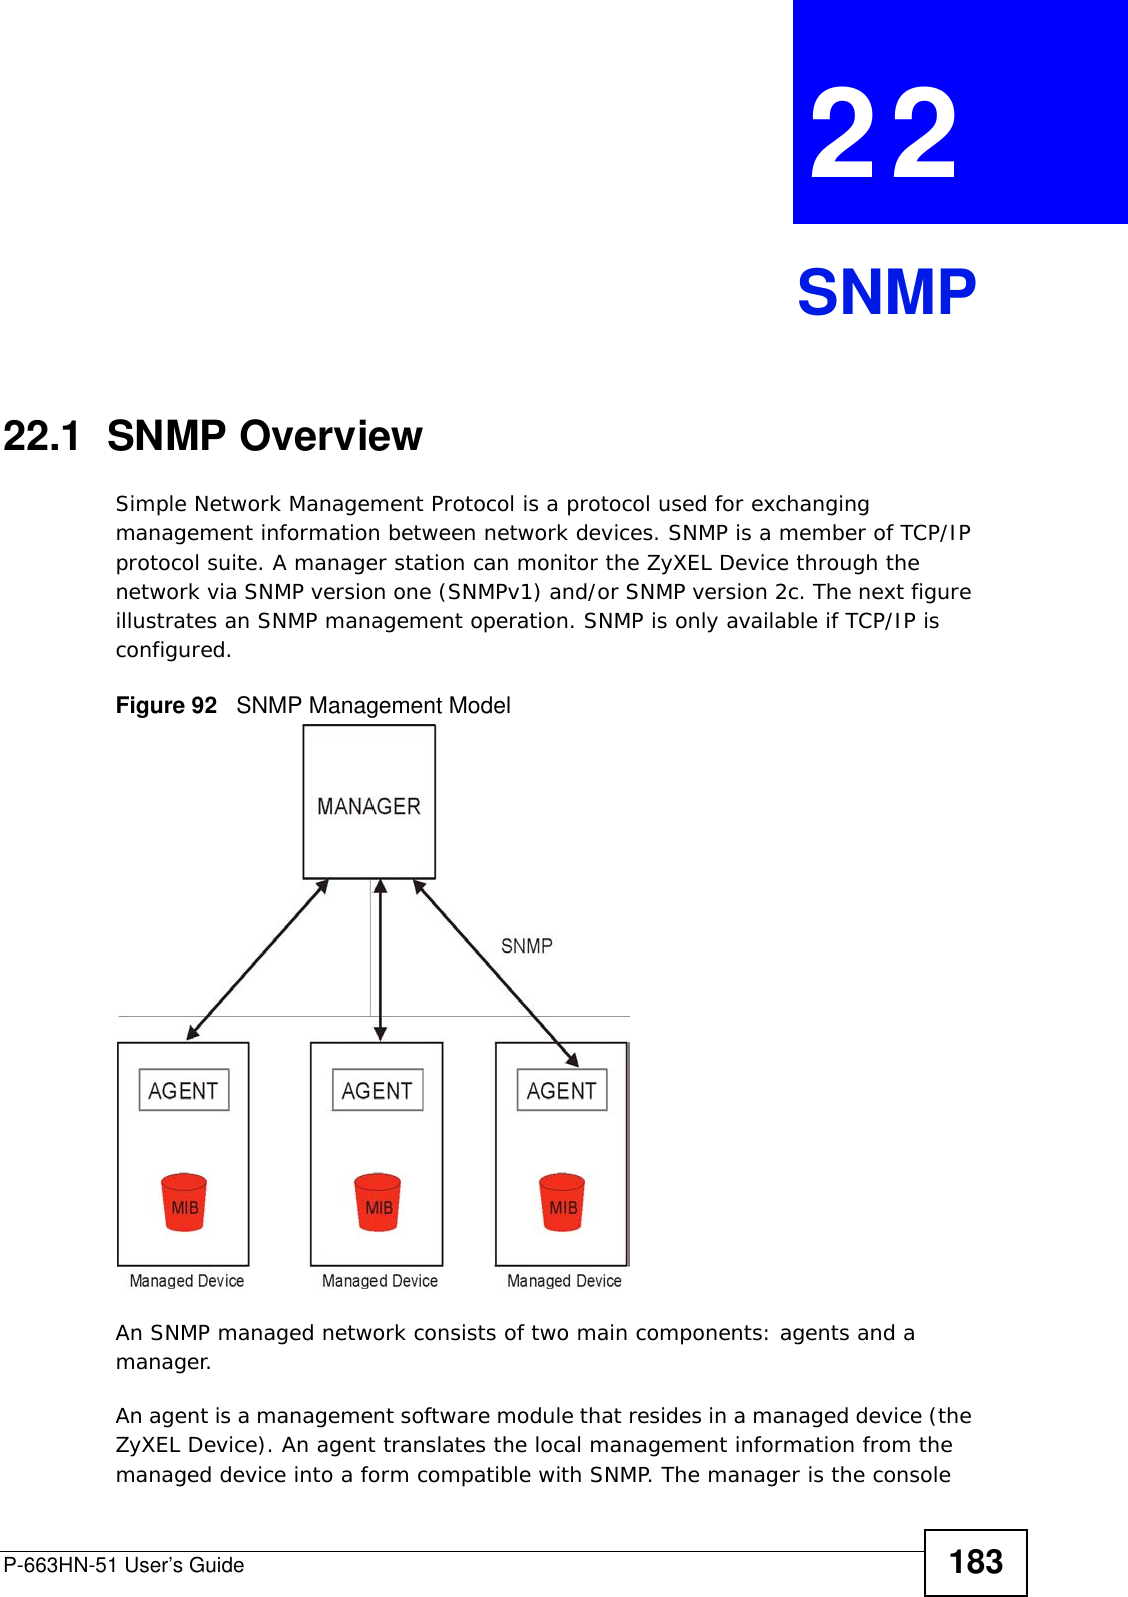 P-663HN-51 User’s Guide 183CHAPTER  22 SNMP22.1  SNMP OverviewSimple Network Management Protocol is a protocol used for exchanging management information between network devices. SNMP is a member of TCP/IP protocol suite. A manager station can monitor the ZyXEL Device through the network via SNMP version one (SNMPv1) and/or SNMP version 2c. The next figure illustrates an SNMP management operation. SNMP is only available if TCP/IP is configured.Figure 92   SNMP Management ModelAn SNMP managed network consists of two main components: agents and a manager.An agent is a management software module that resides in a managed device (the ZyXEL Device). An agent translates the local management information from the managed device into a form compatible with SNMP. The manager is the console 